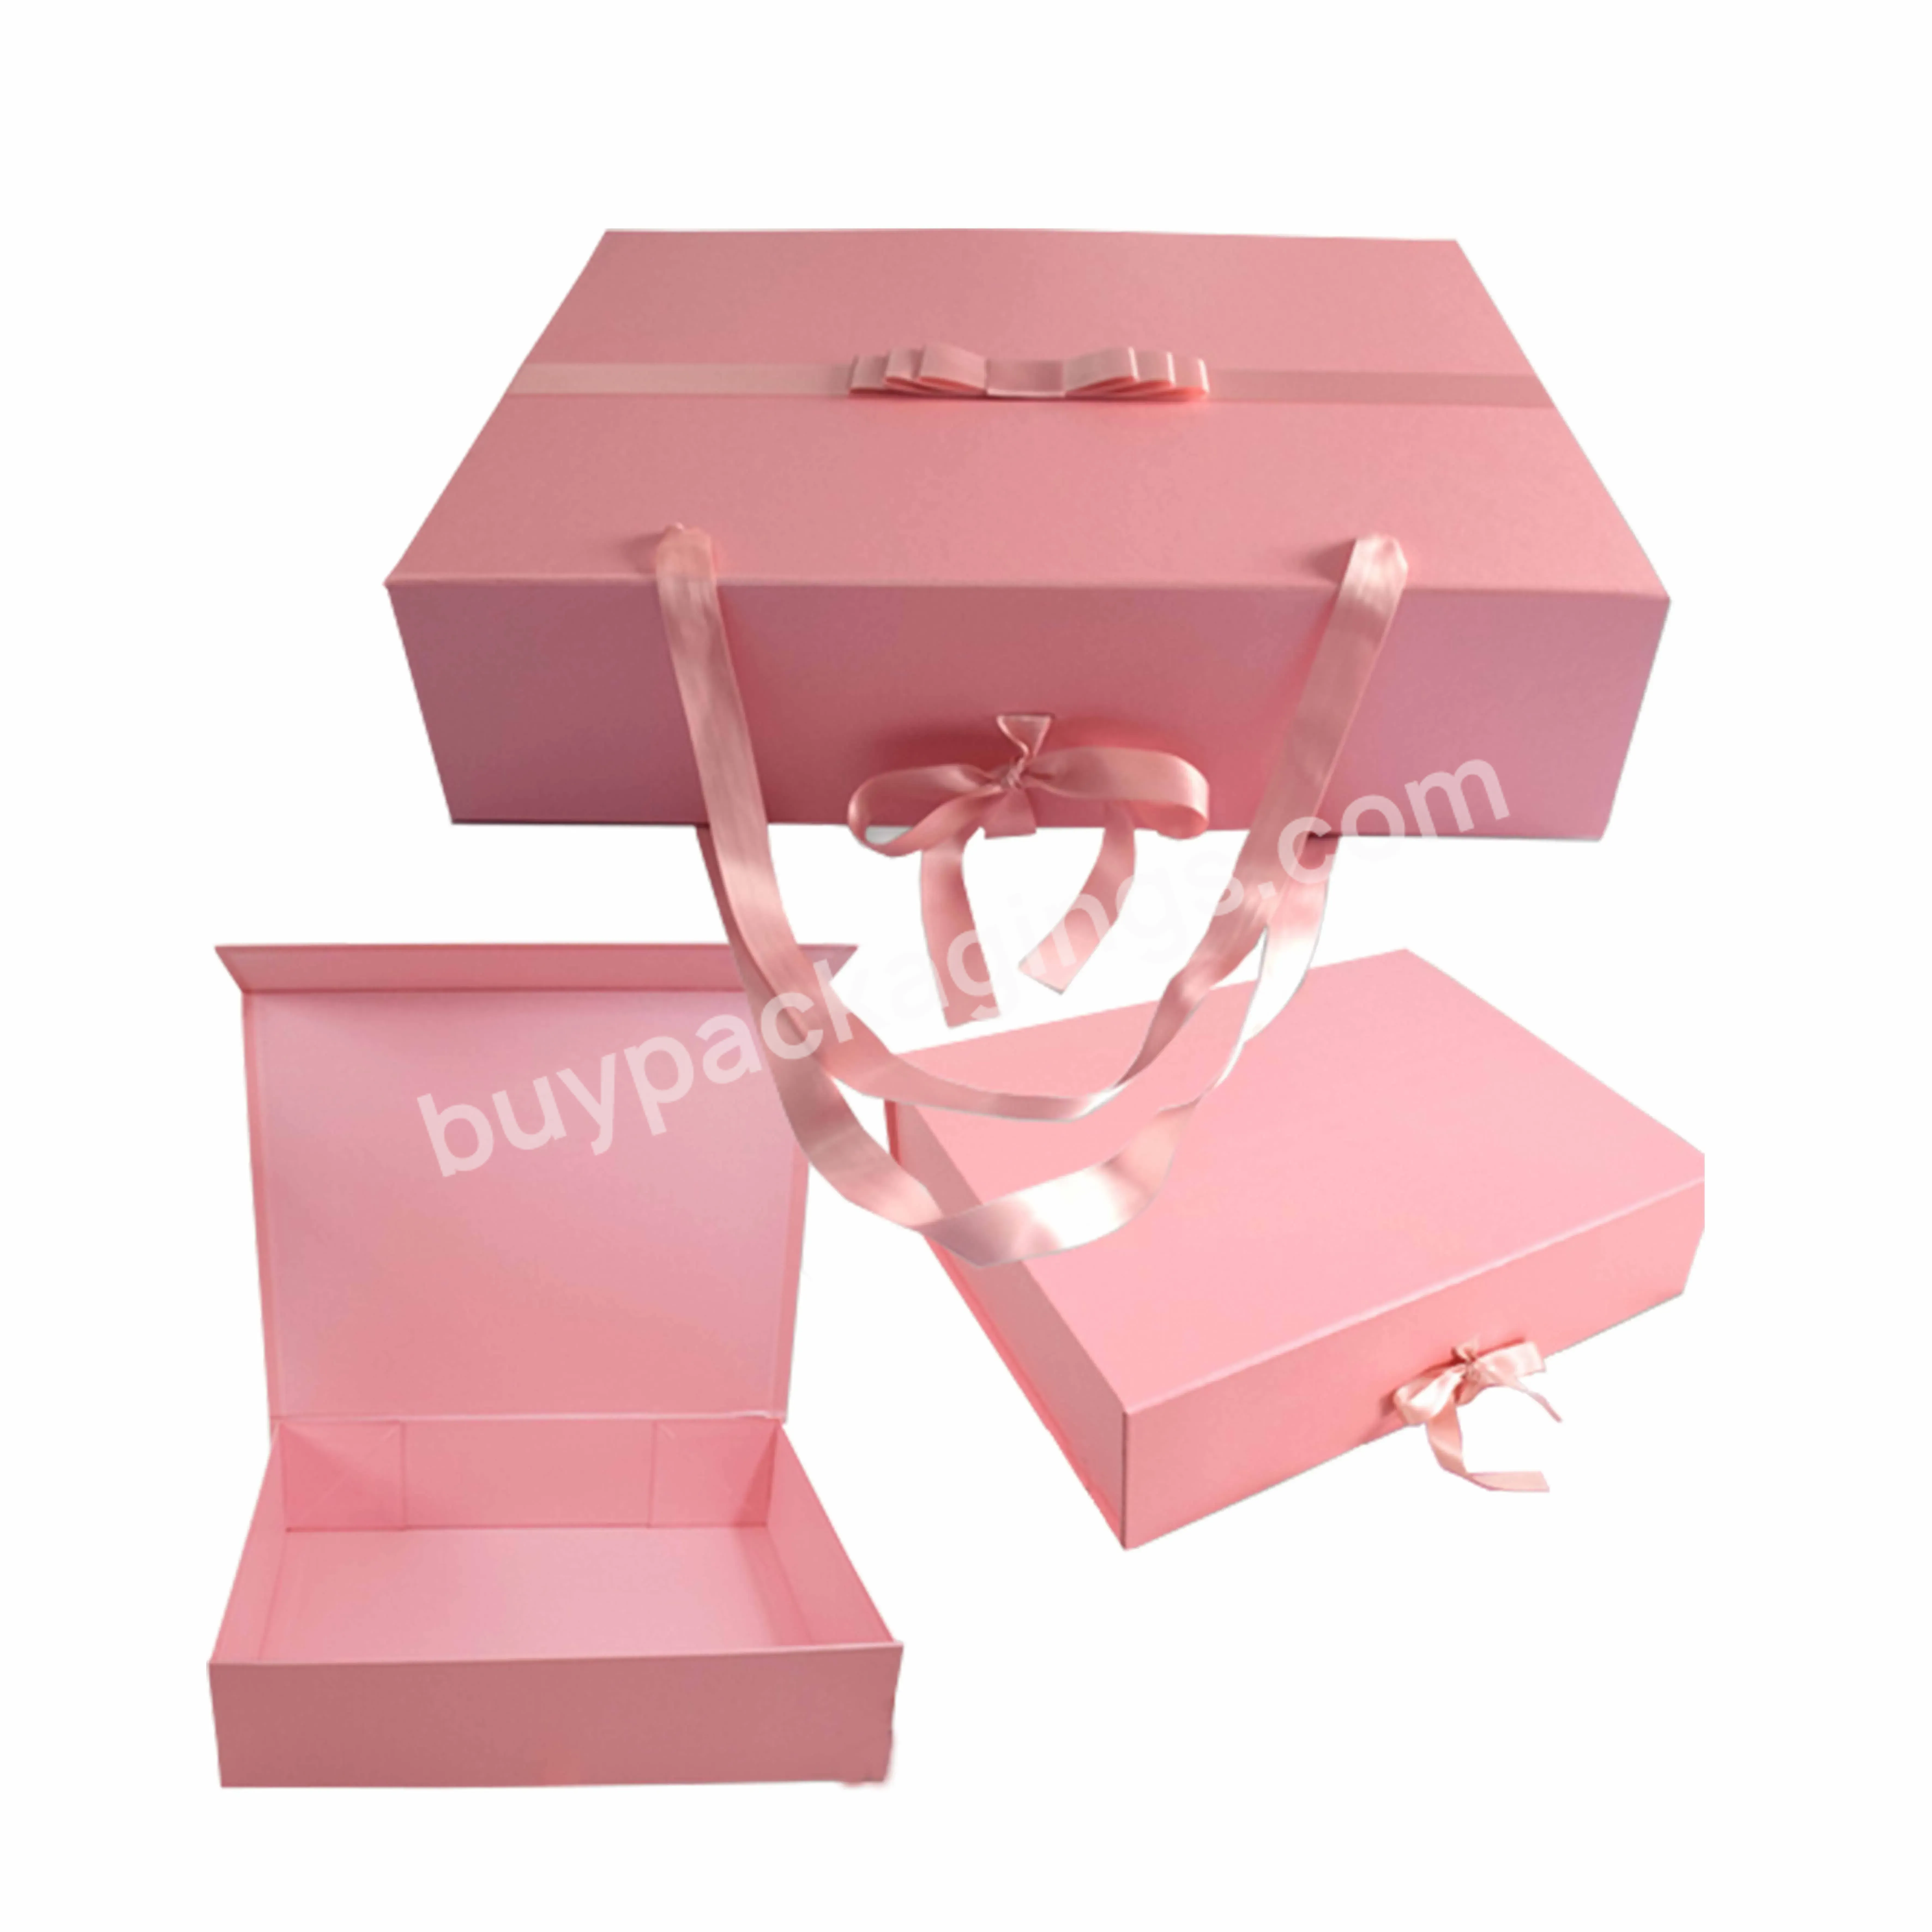 Oem Logo Printing Lingerie Packaging Box With High Quality Factory In Shenzhen